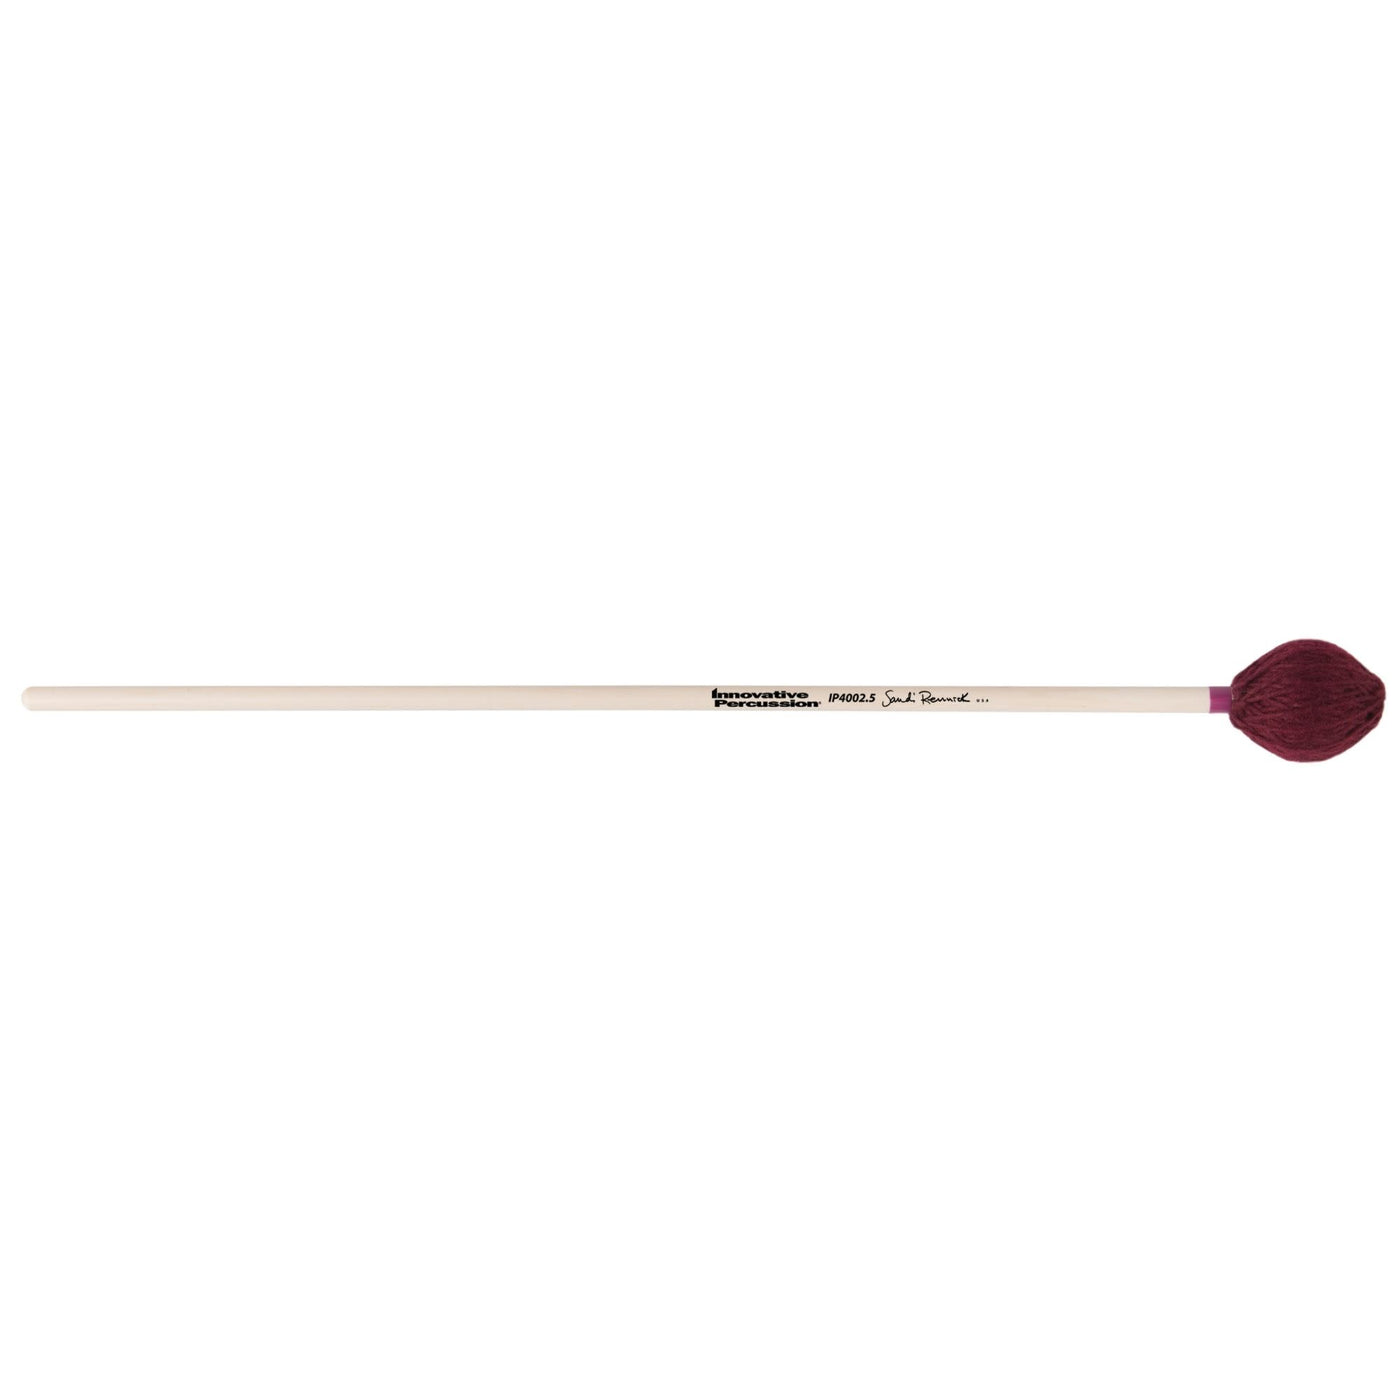 Innovative Percussion IP4002.5 Keyboard Mallet